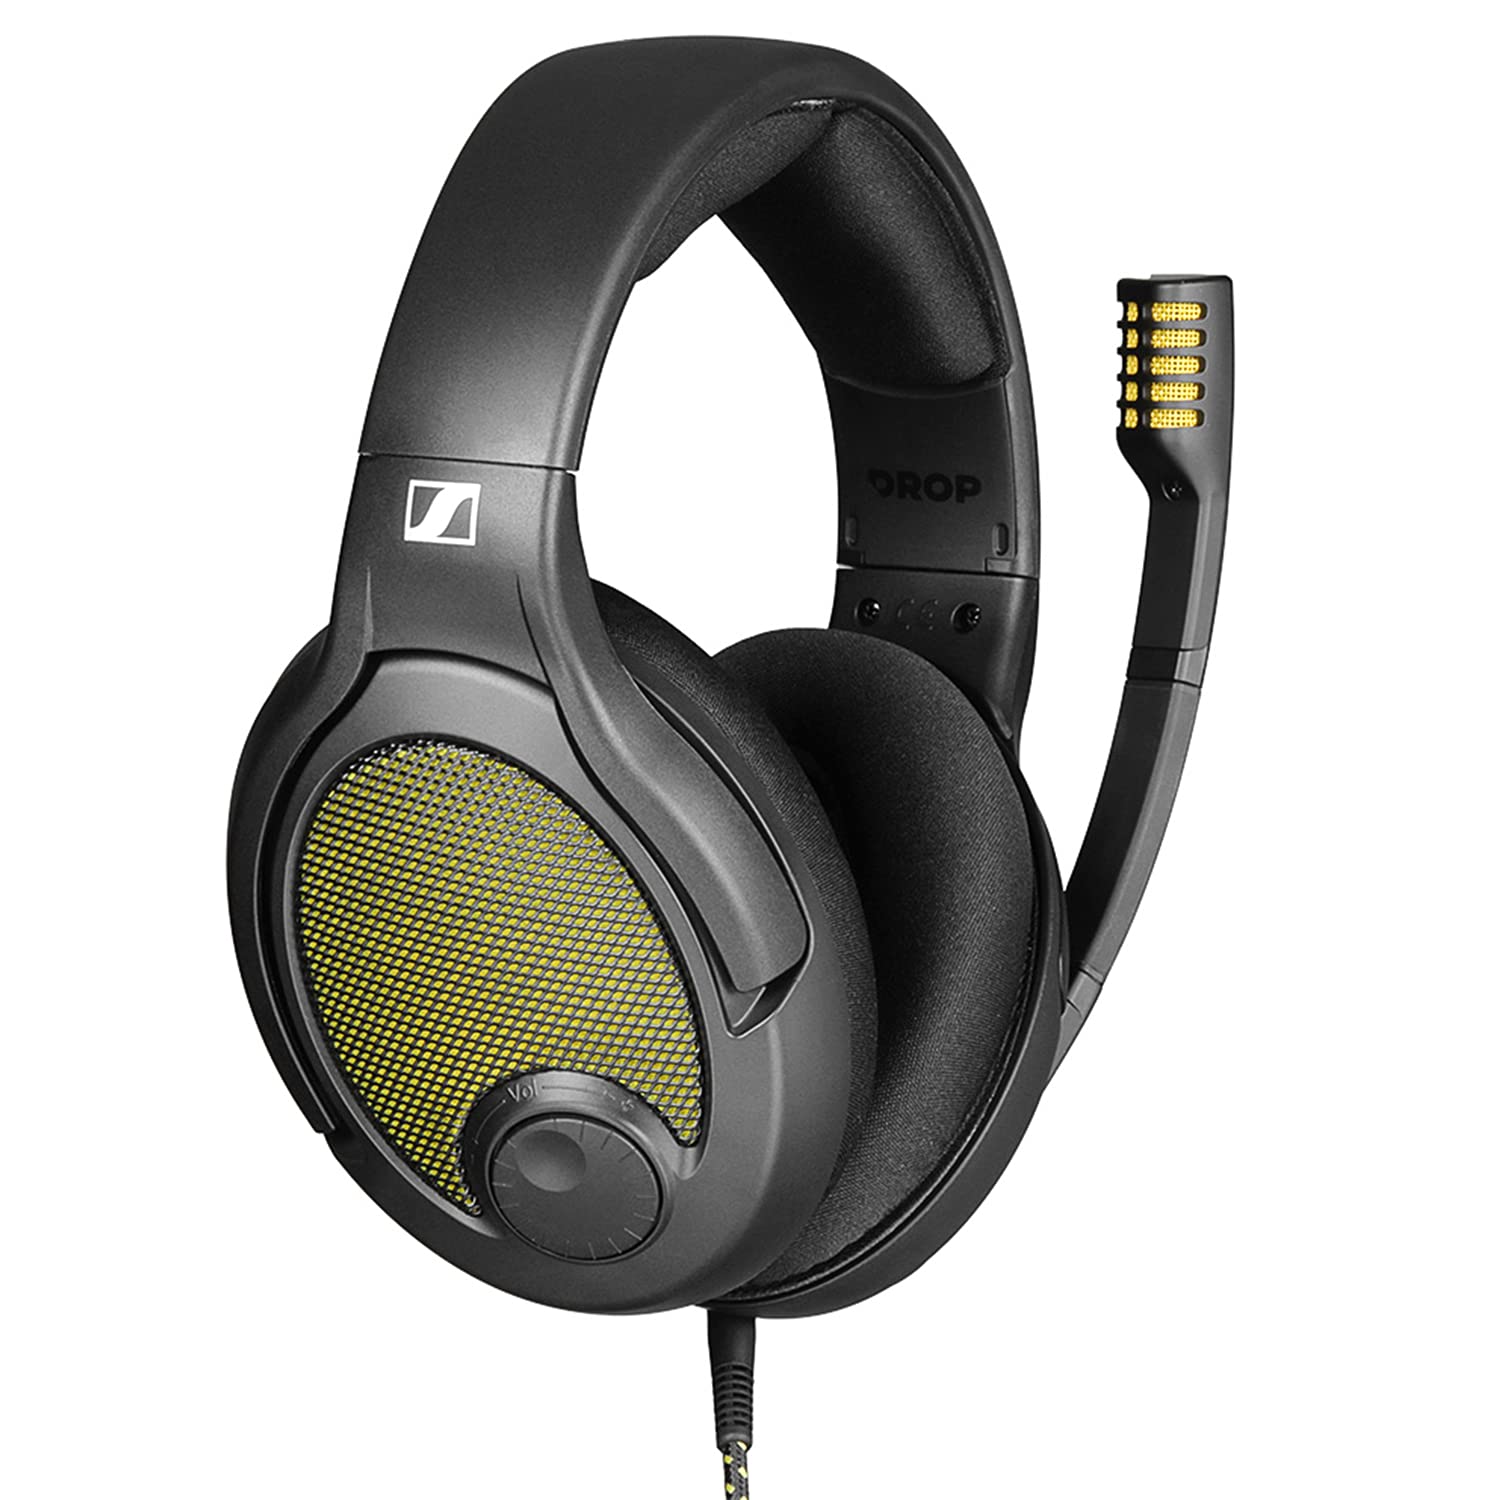 Drop + Sennheiser PC38X Gaming Headset — Noise-Cancelling Microphone with Over-Ear Open-Back Design, Velour Earpads, Compatible with PC, PS4, PS5, Switch, Xbox, Mac, Mobile, and More